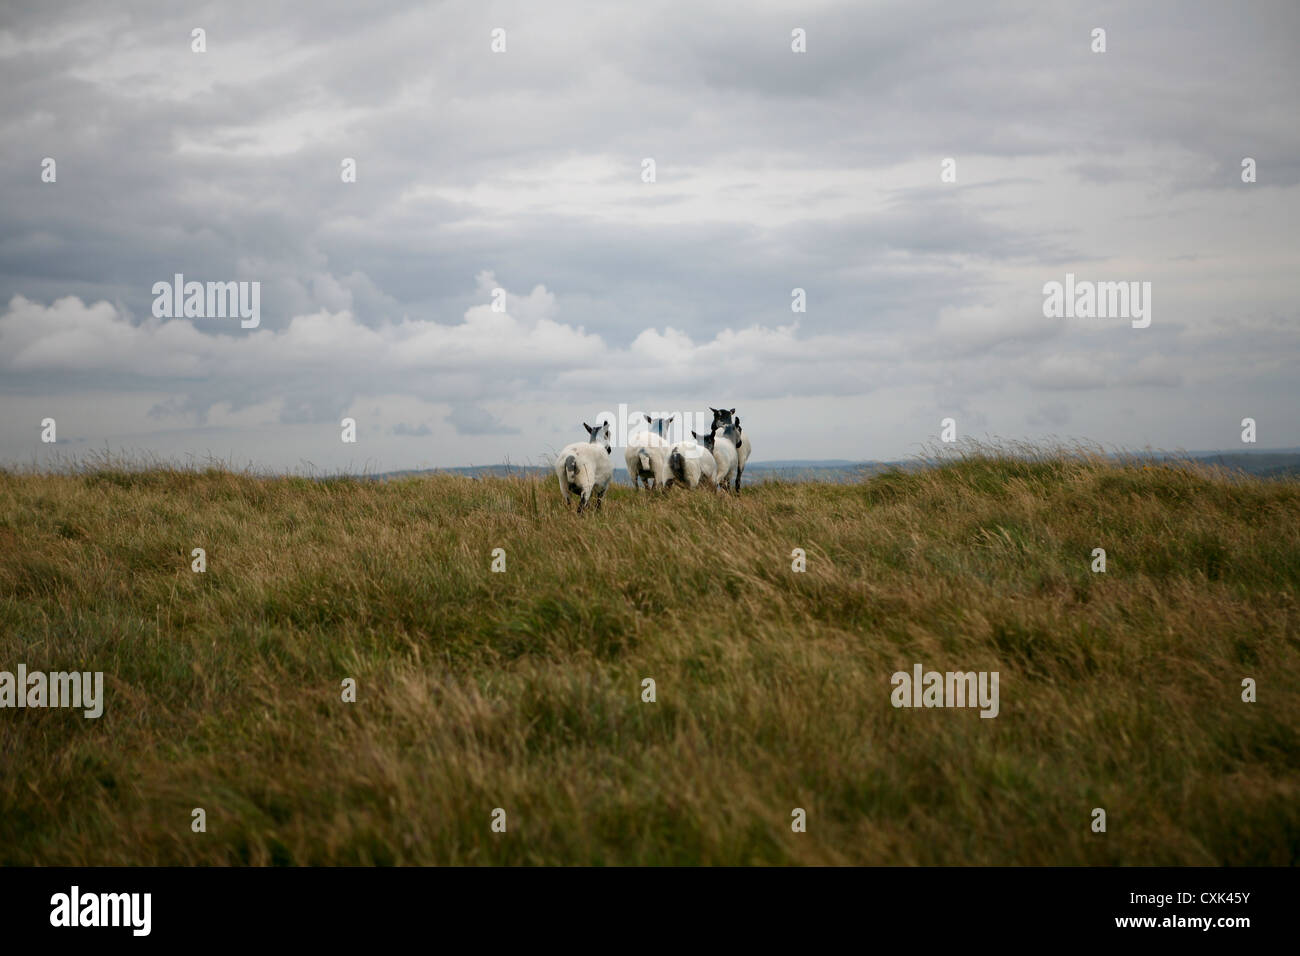 A group of five Suffolk sheep wandering about on Dartmoor, looking over the horizon Stock Photo